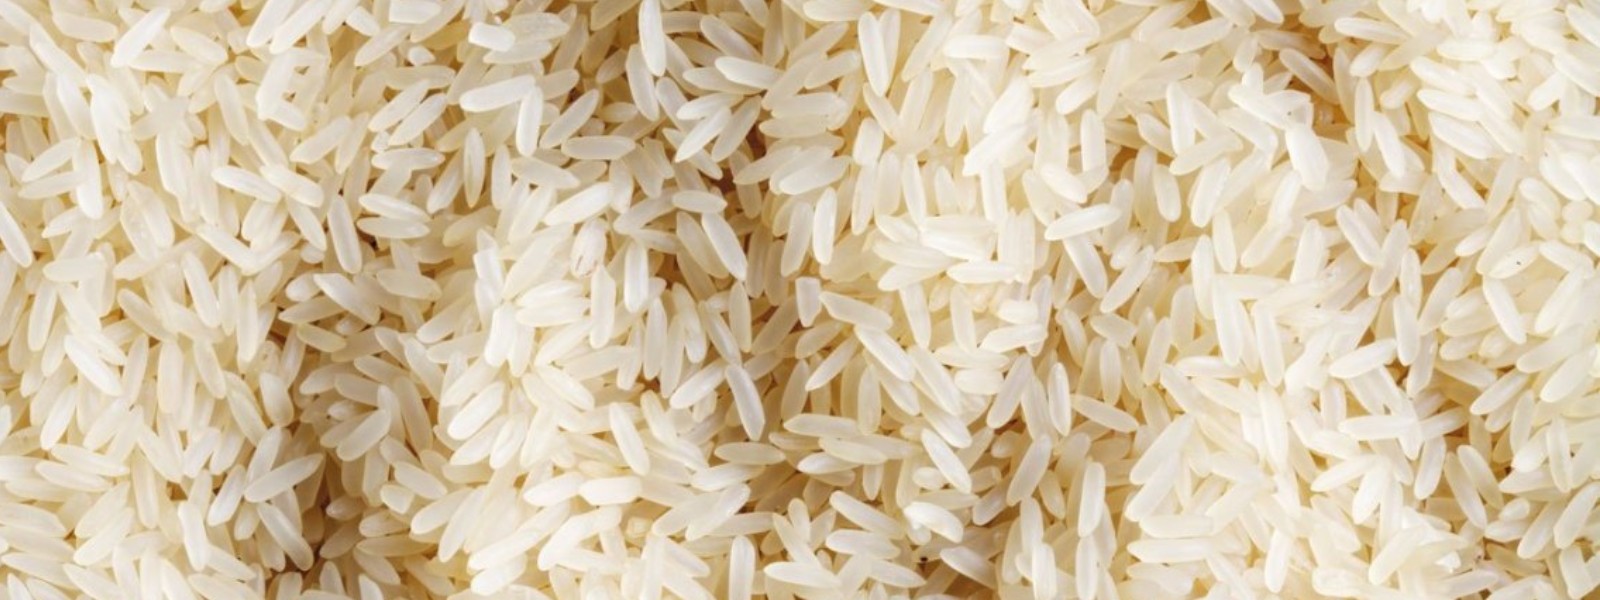 MoU with Myanmar to import 100,000 MT rice